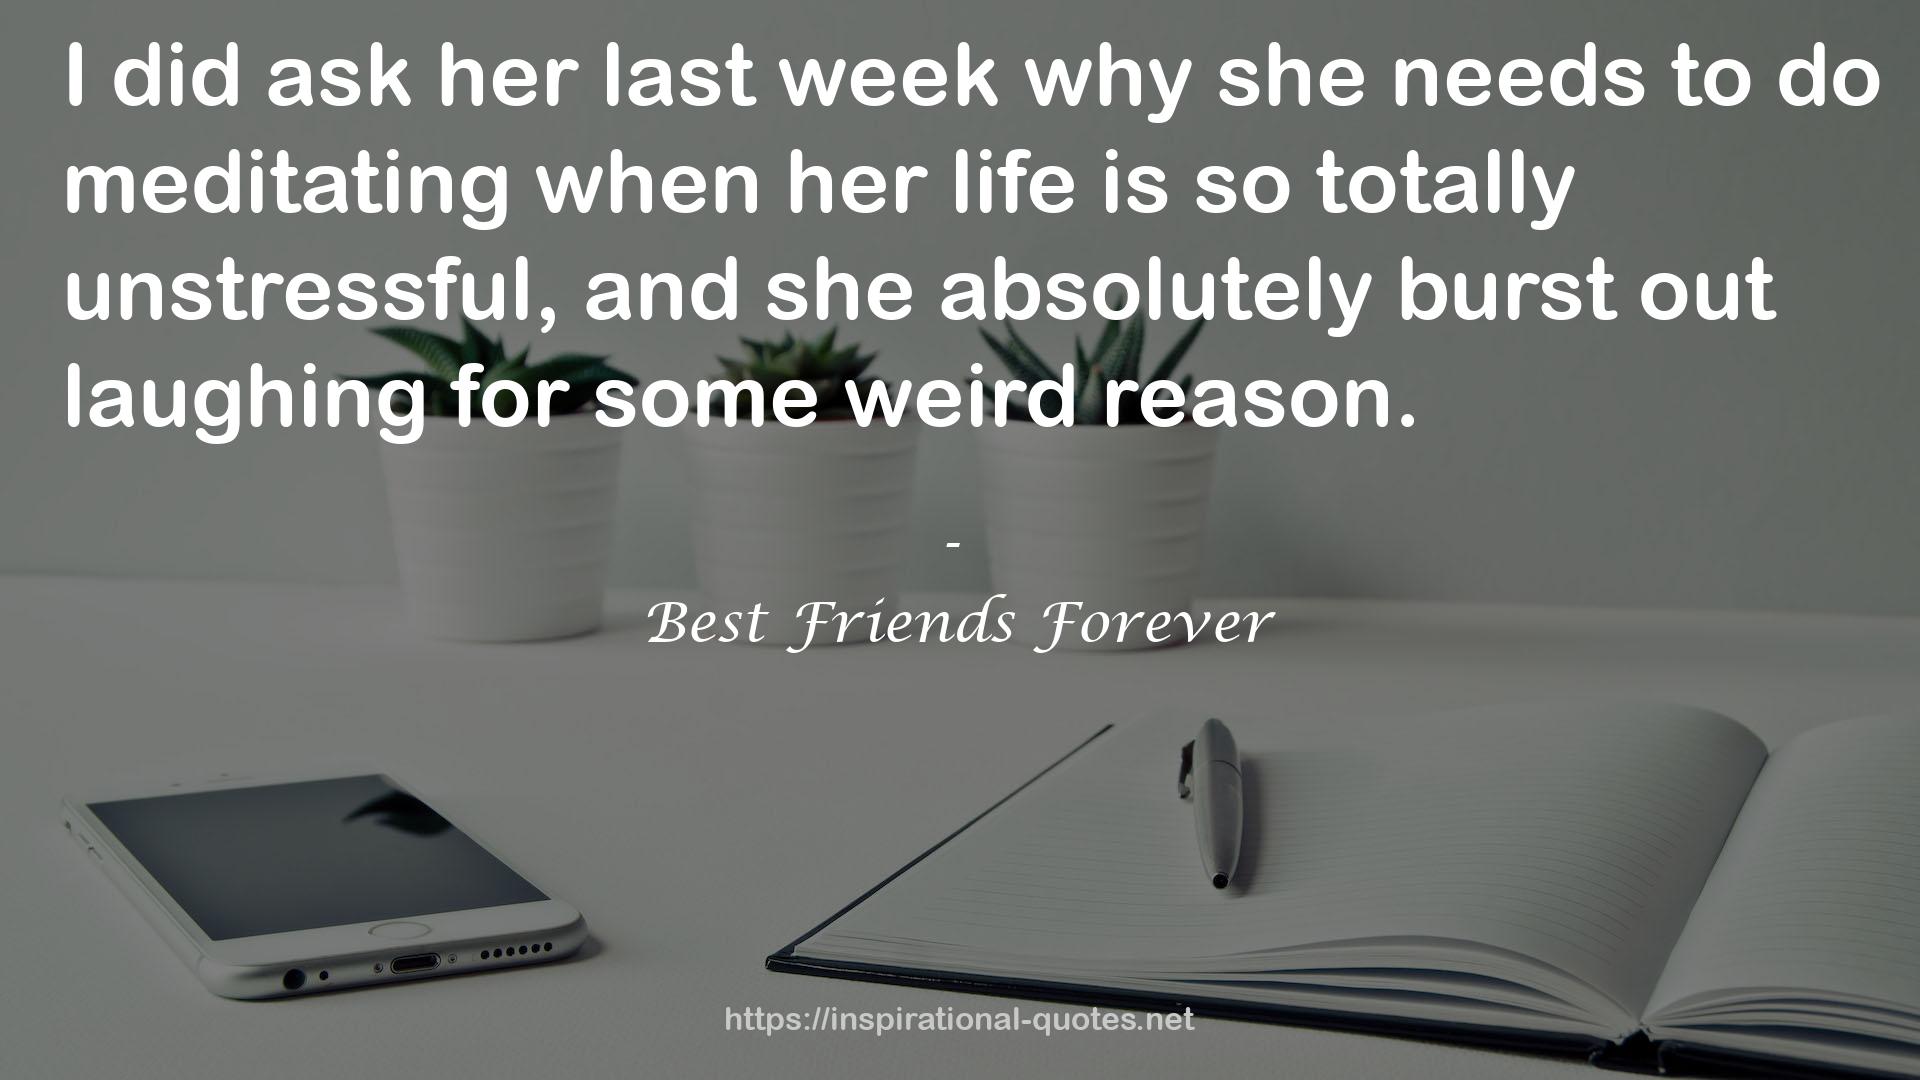 Best Friends Forever QUOTES